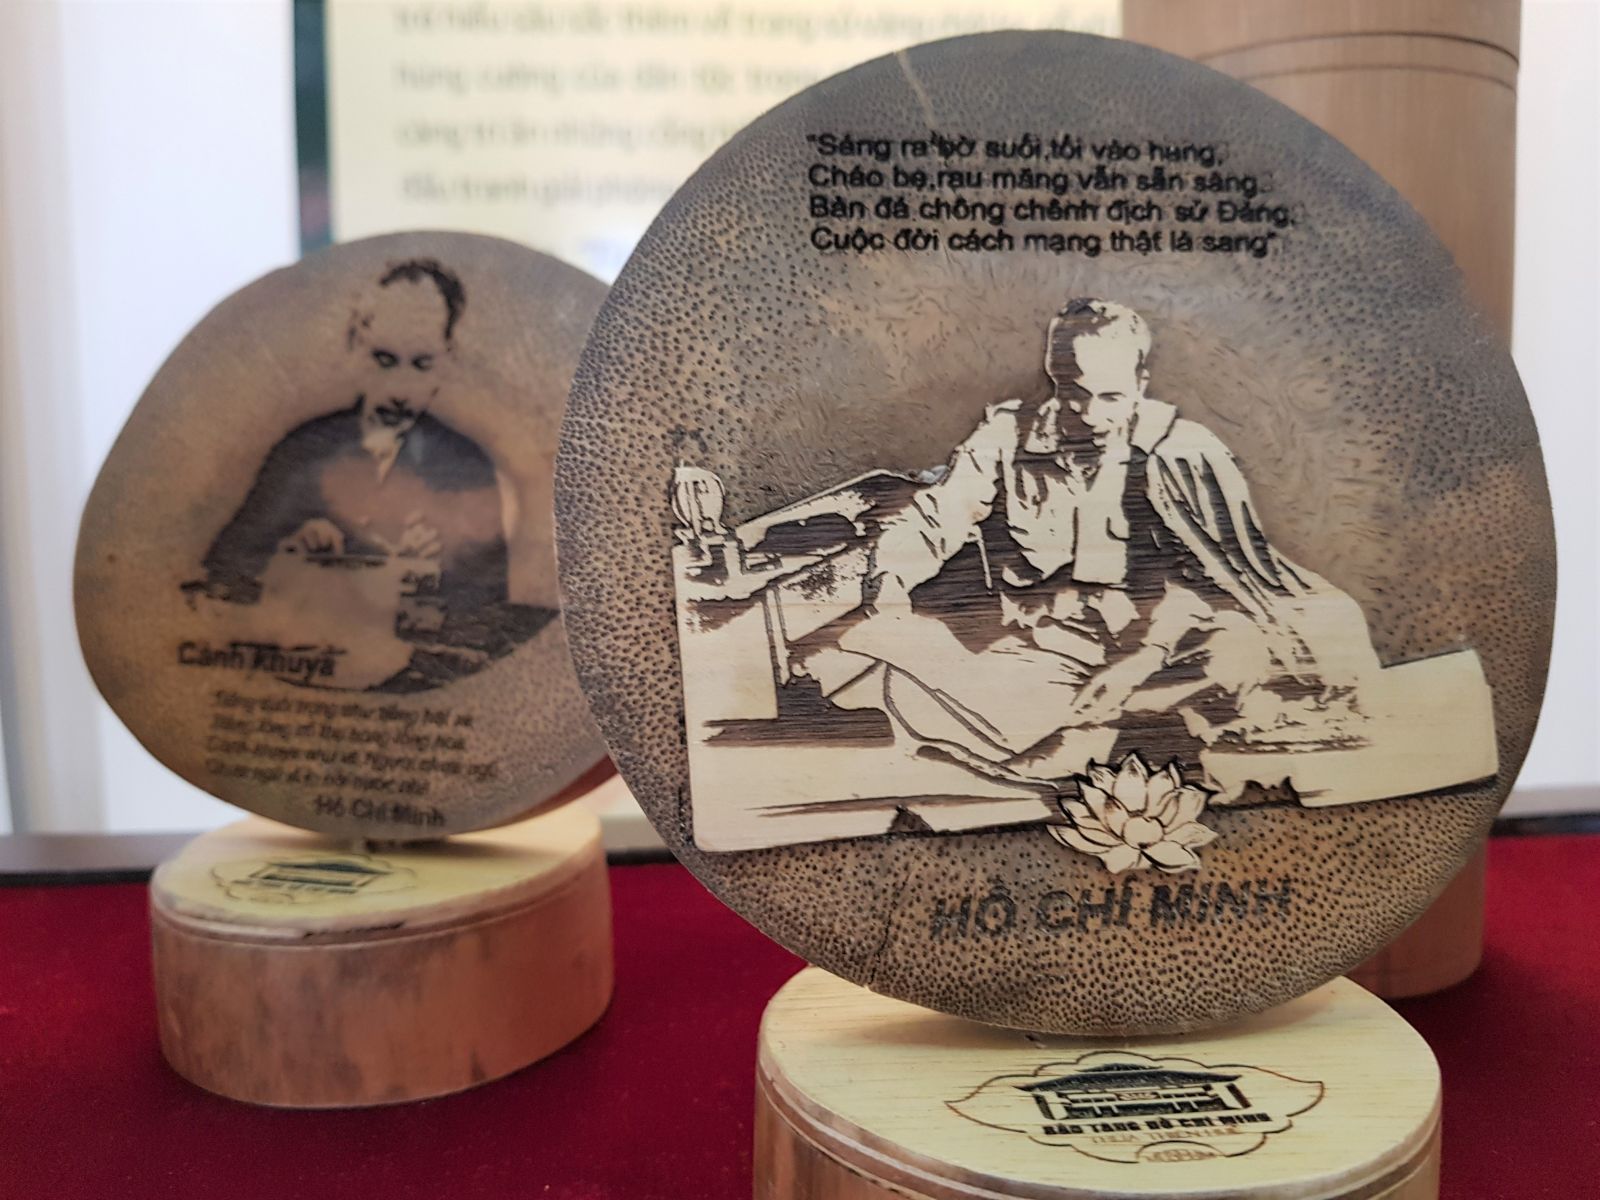 The souvenir products engraved with Uncle Ho’s image and his verses